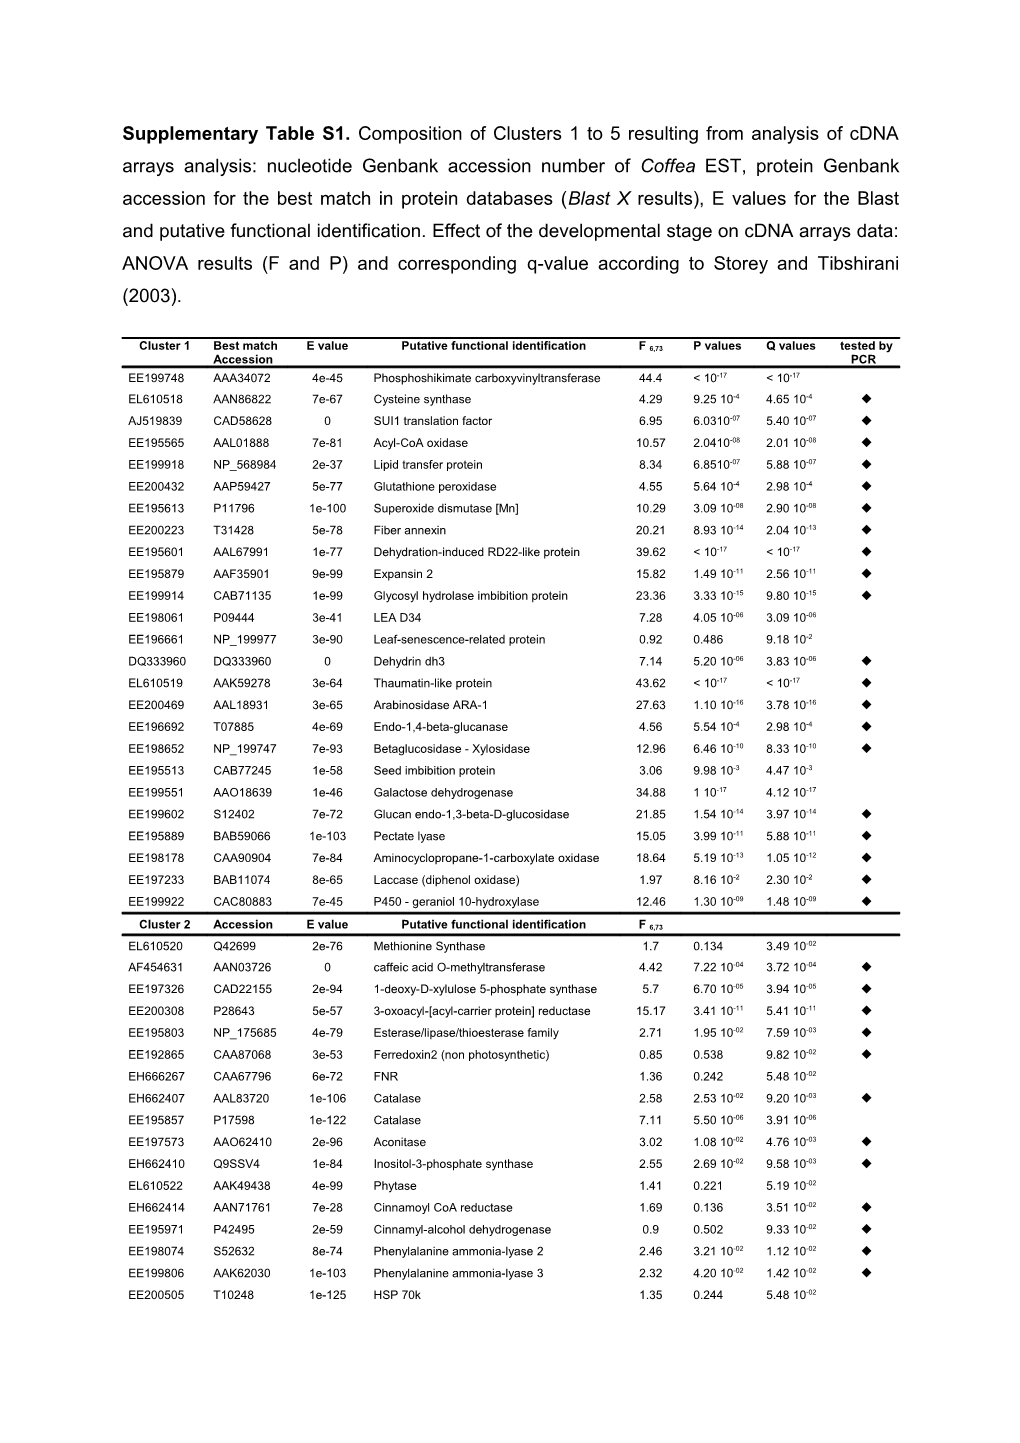 Supplementary Table S1. Composition of Clusters 1 to 5 Resulting from Analysis of Cdna